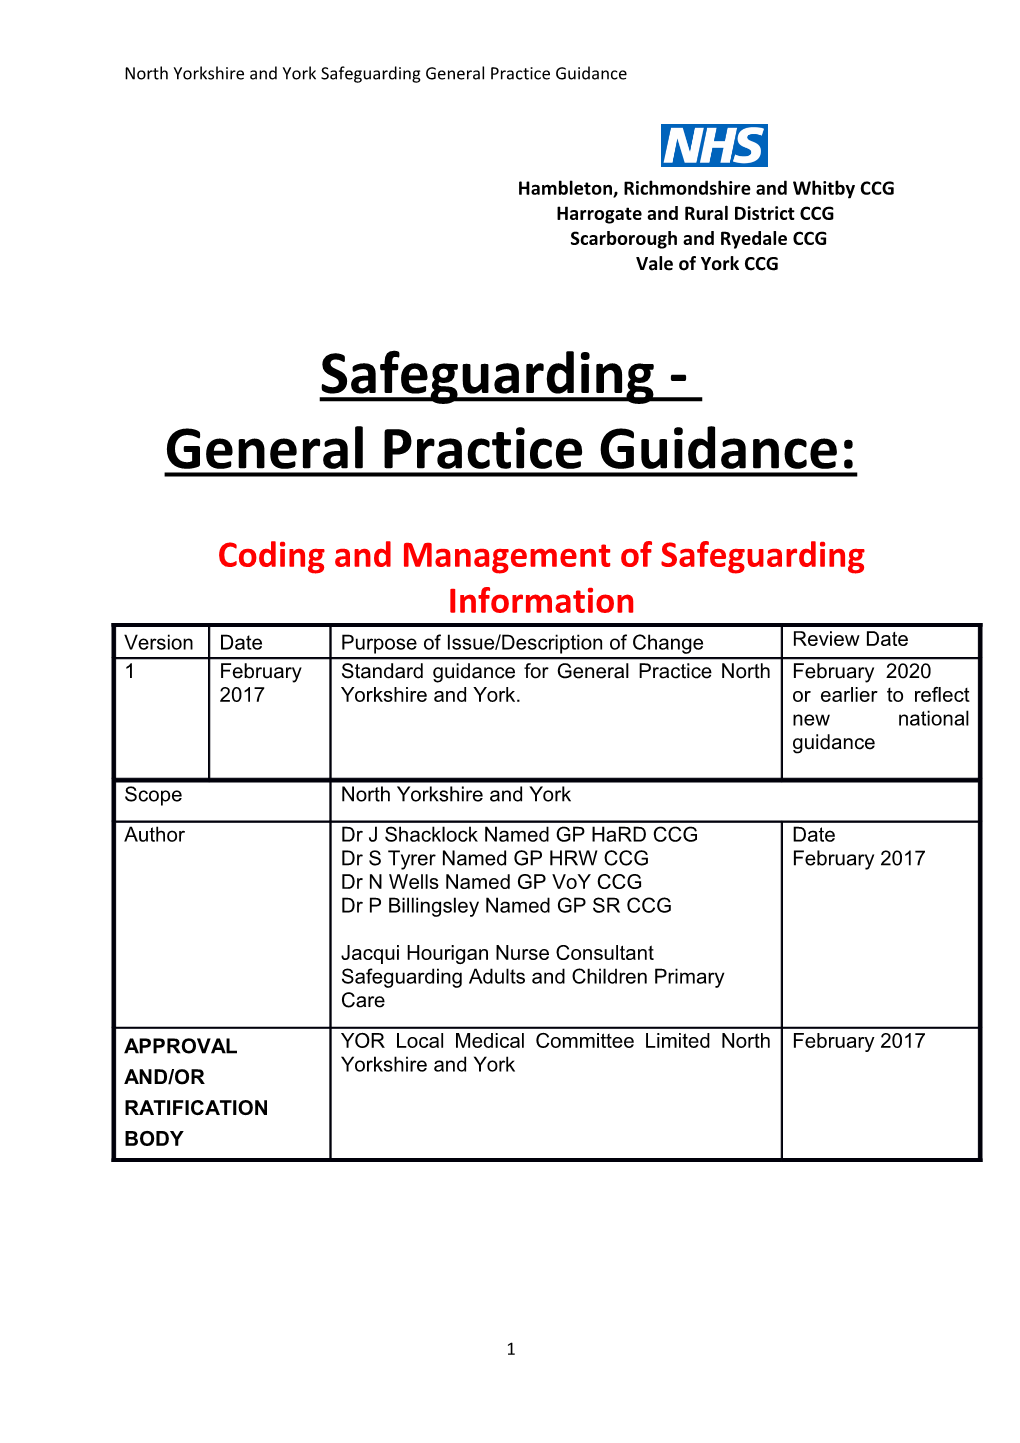 North Yorkshire and York Safeguarding General Practice Guidance